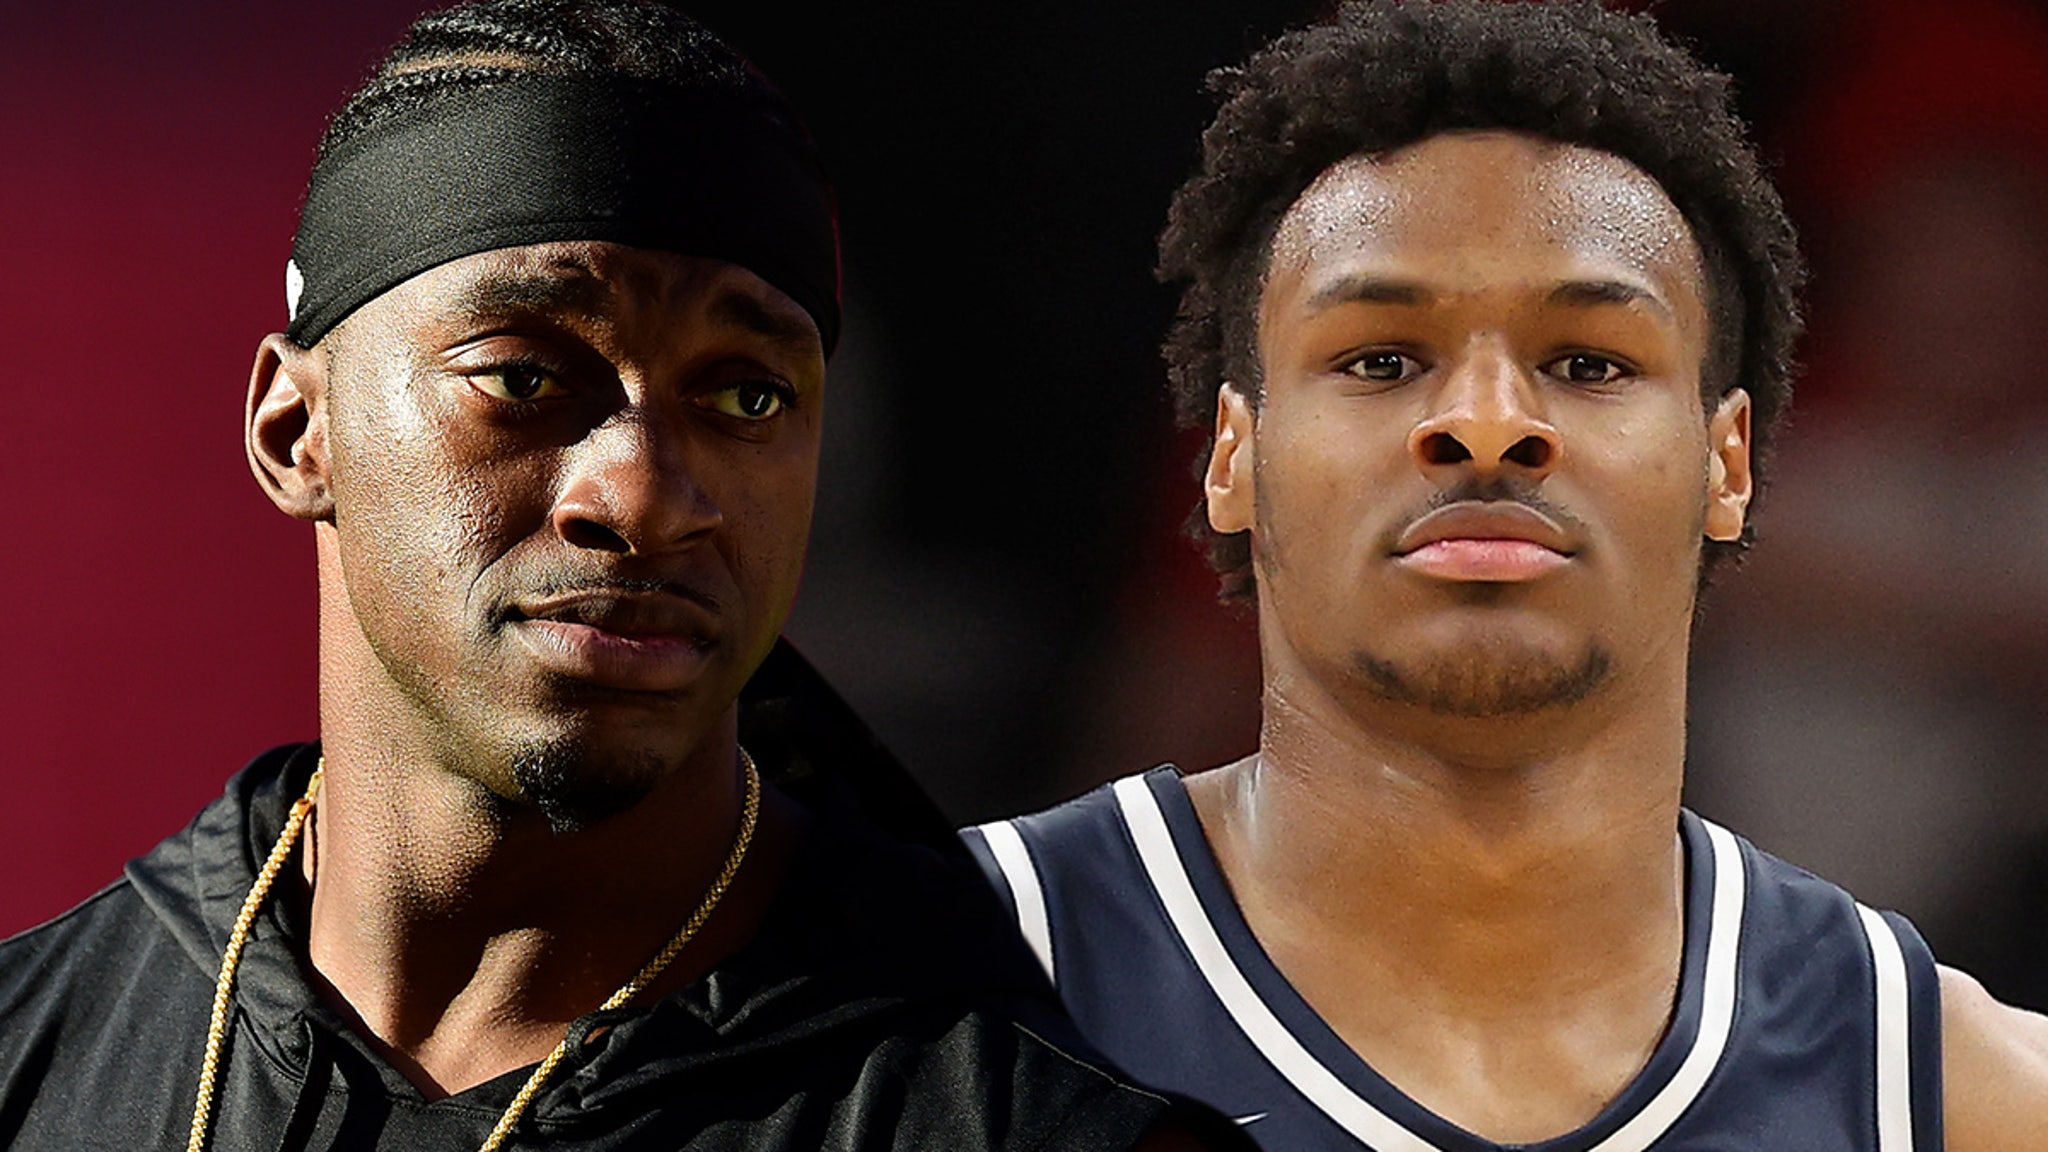 RG3 defends Bronny James’ White Prom Date, ‘Leave These Kids Alone’